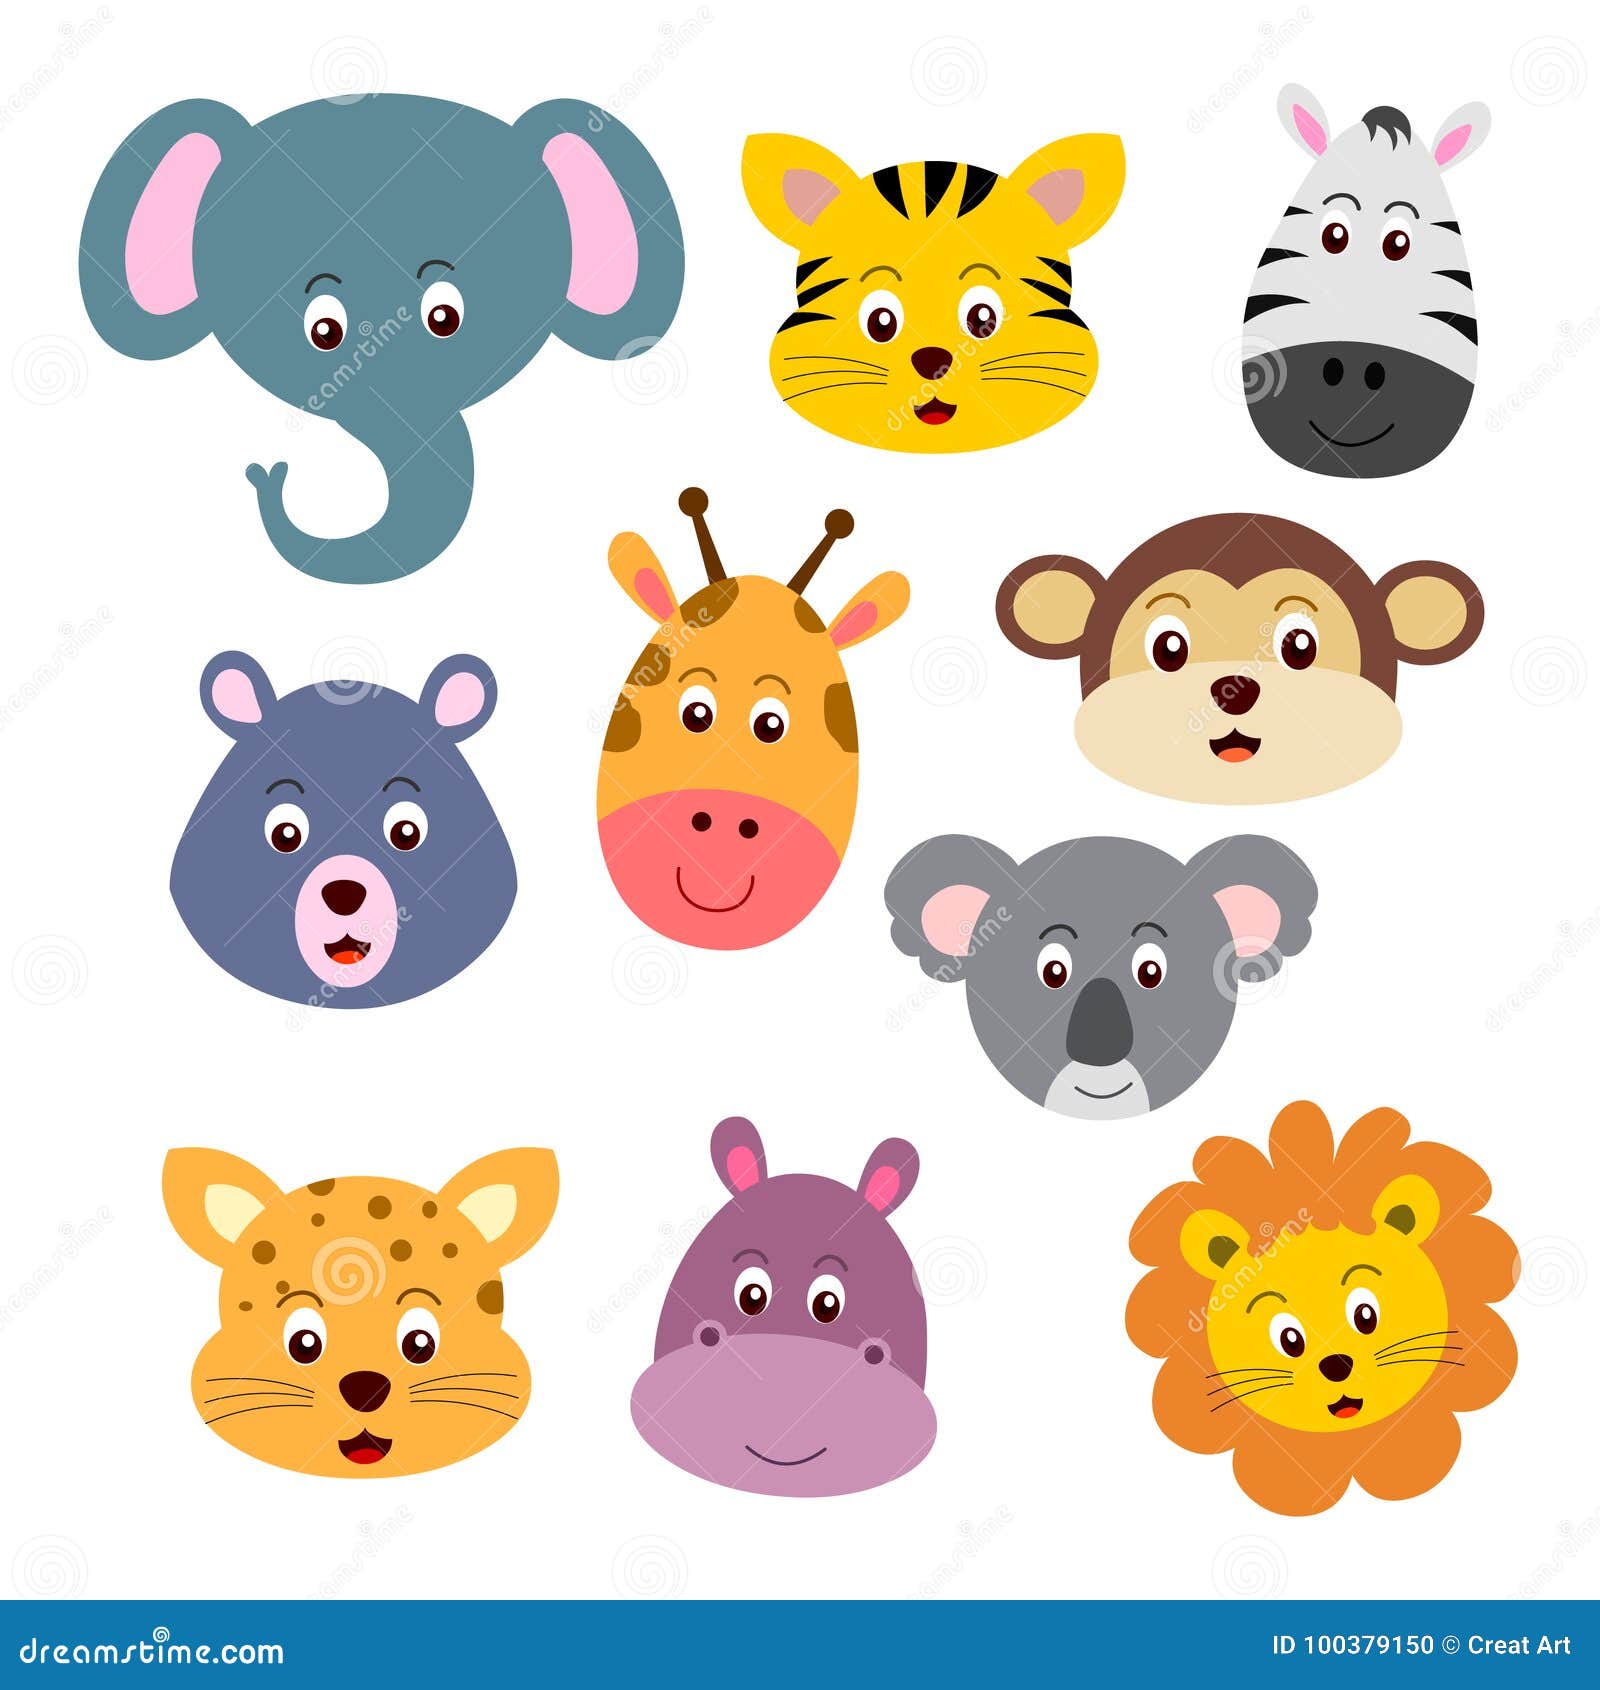 animal faces